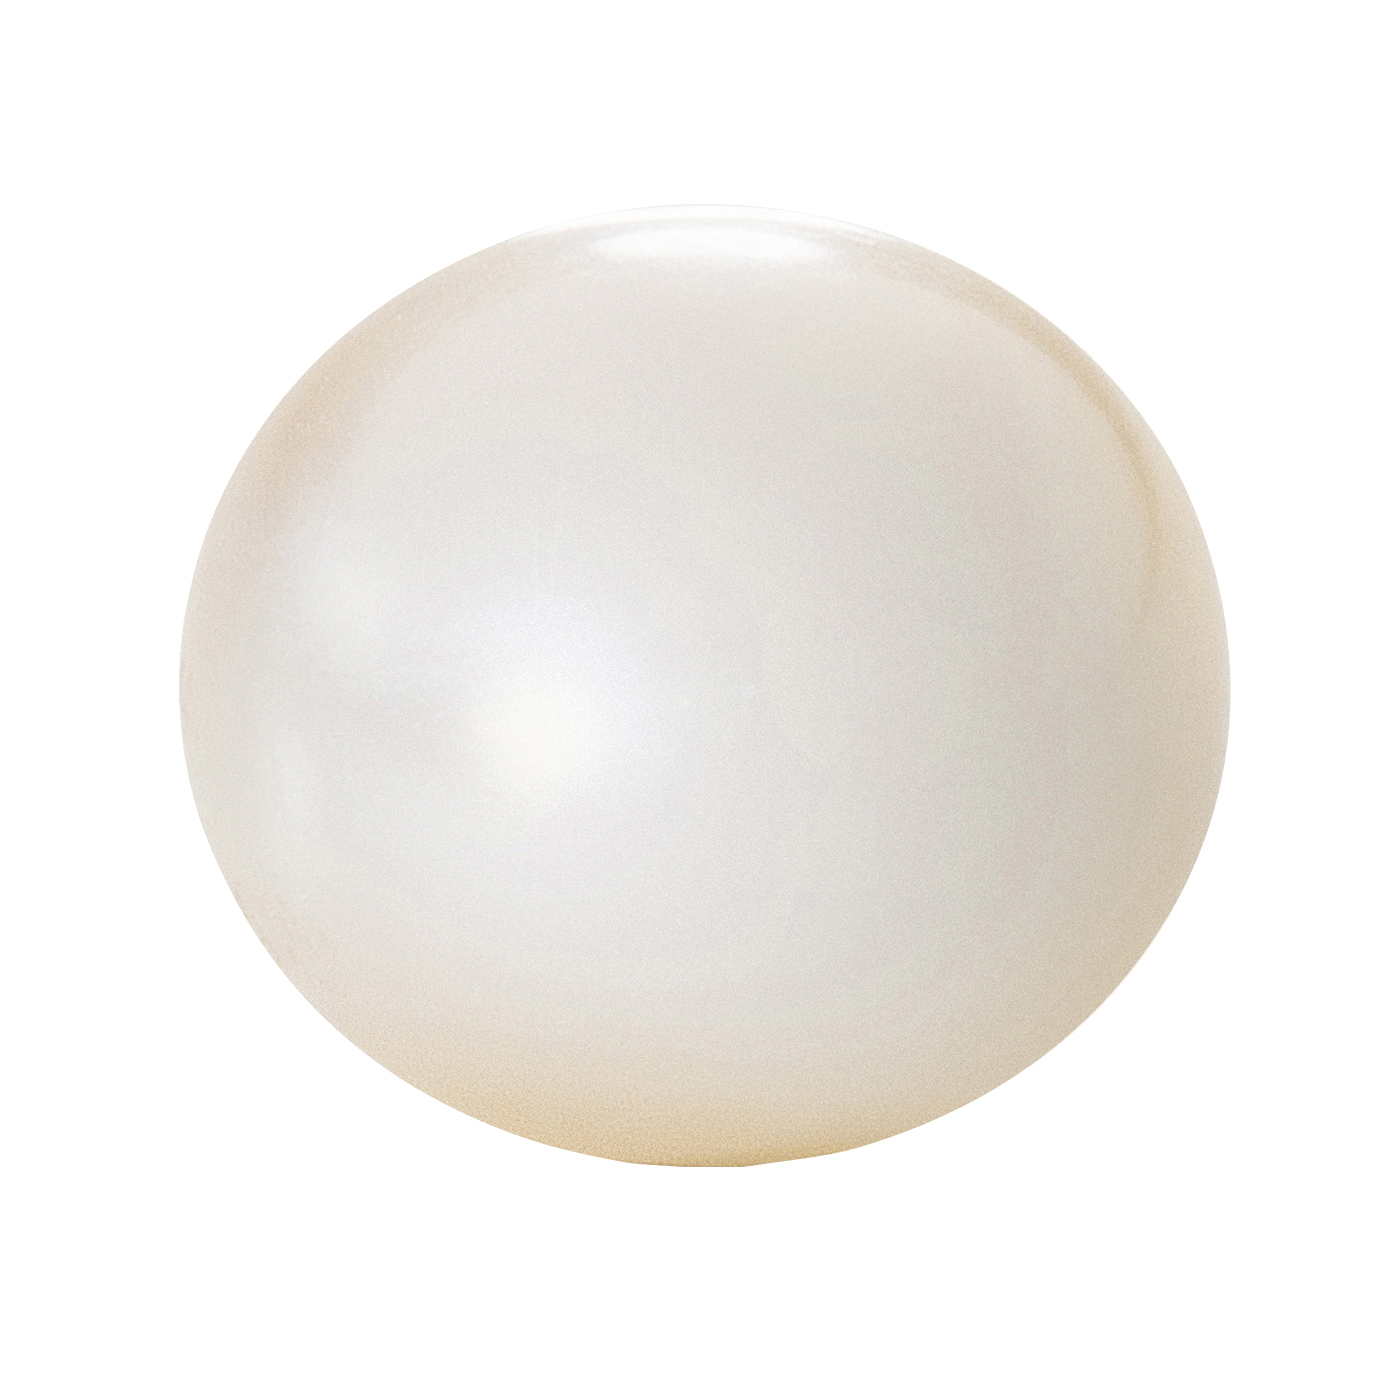 Cultured Pearl, Freshwater, Bouton, ø 8.5-9.0 mm, White - 1 piece